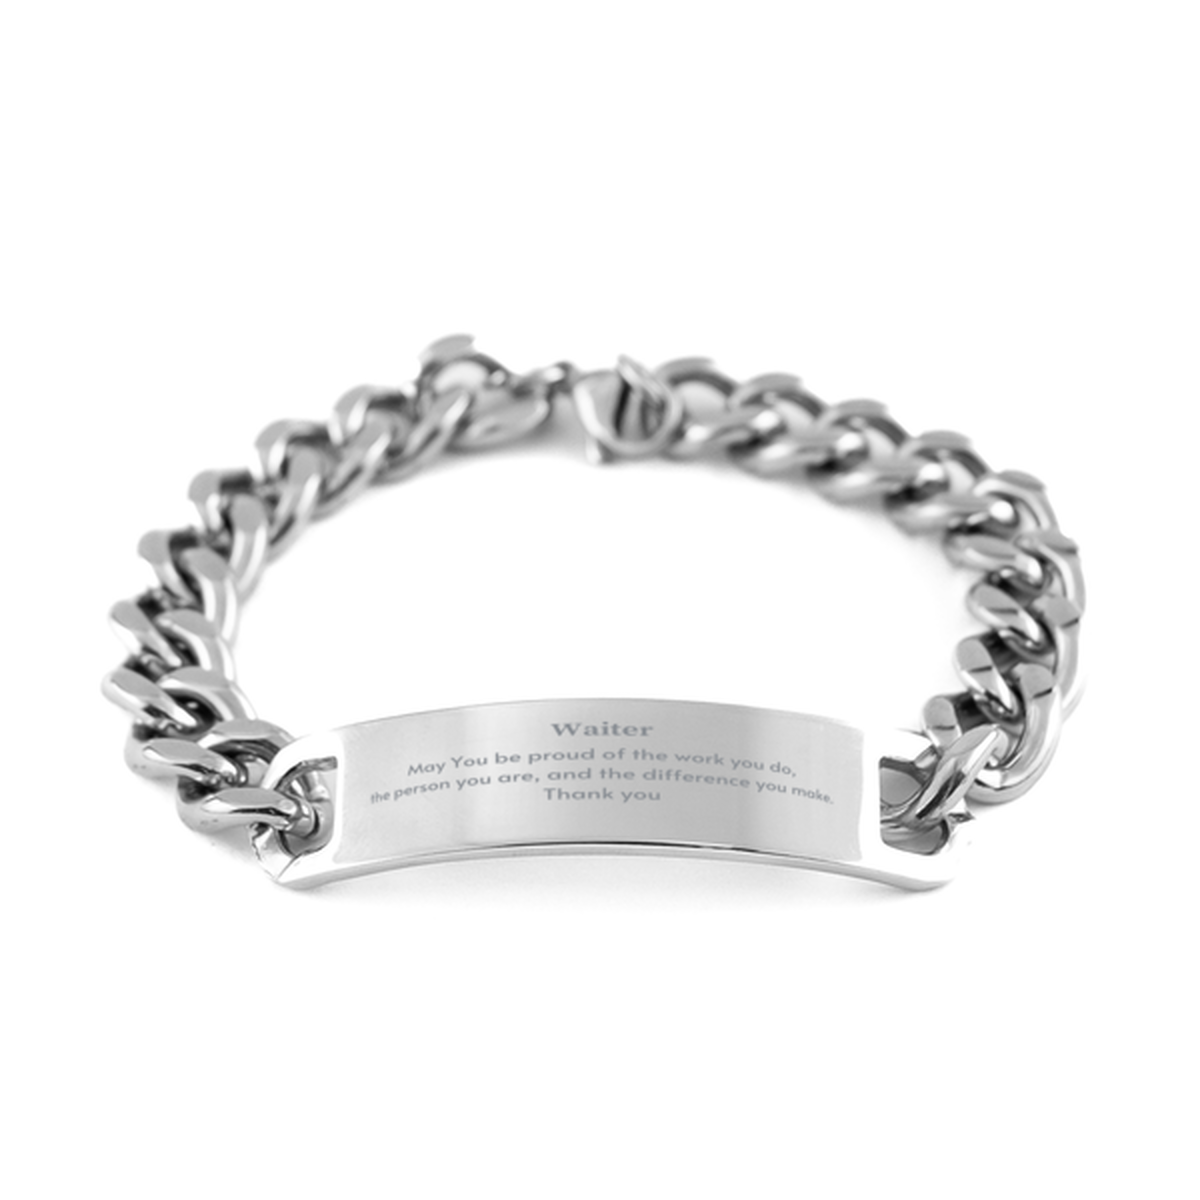 Heartwarming Cuban Chain Stainless Steel Bracelet Retirement Coworkers Gifts for Waiter, Waiter May You be proud of the work you do, the person you are Gifts for Boss Men Women Friends